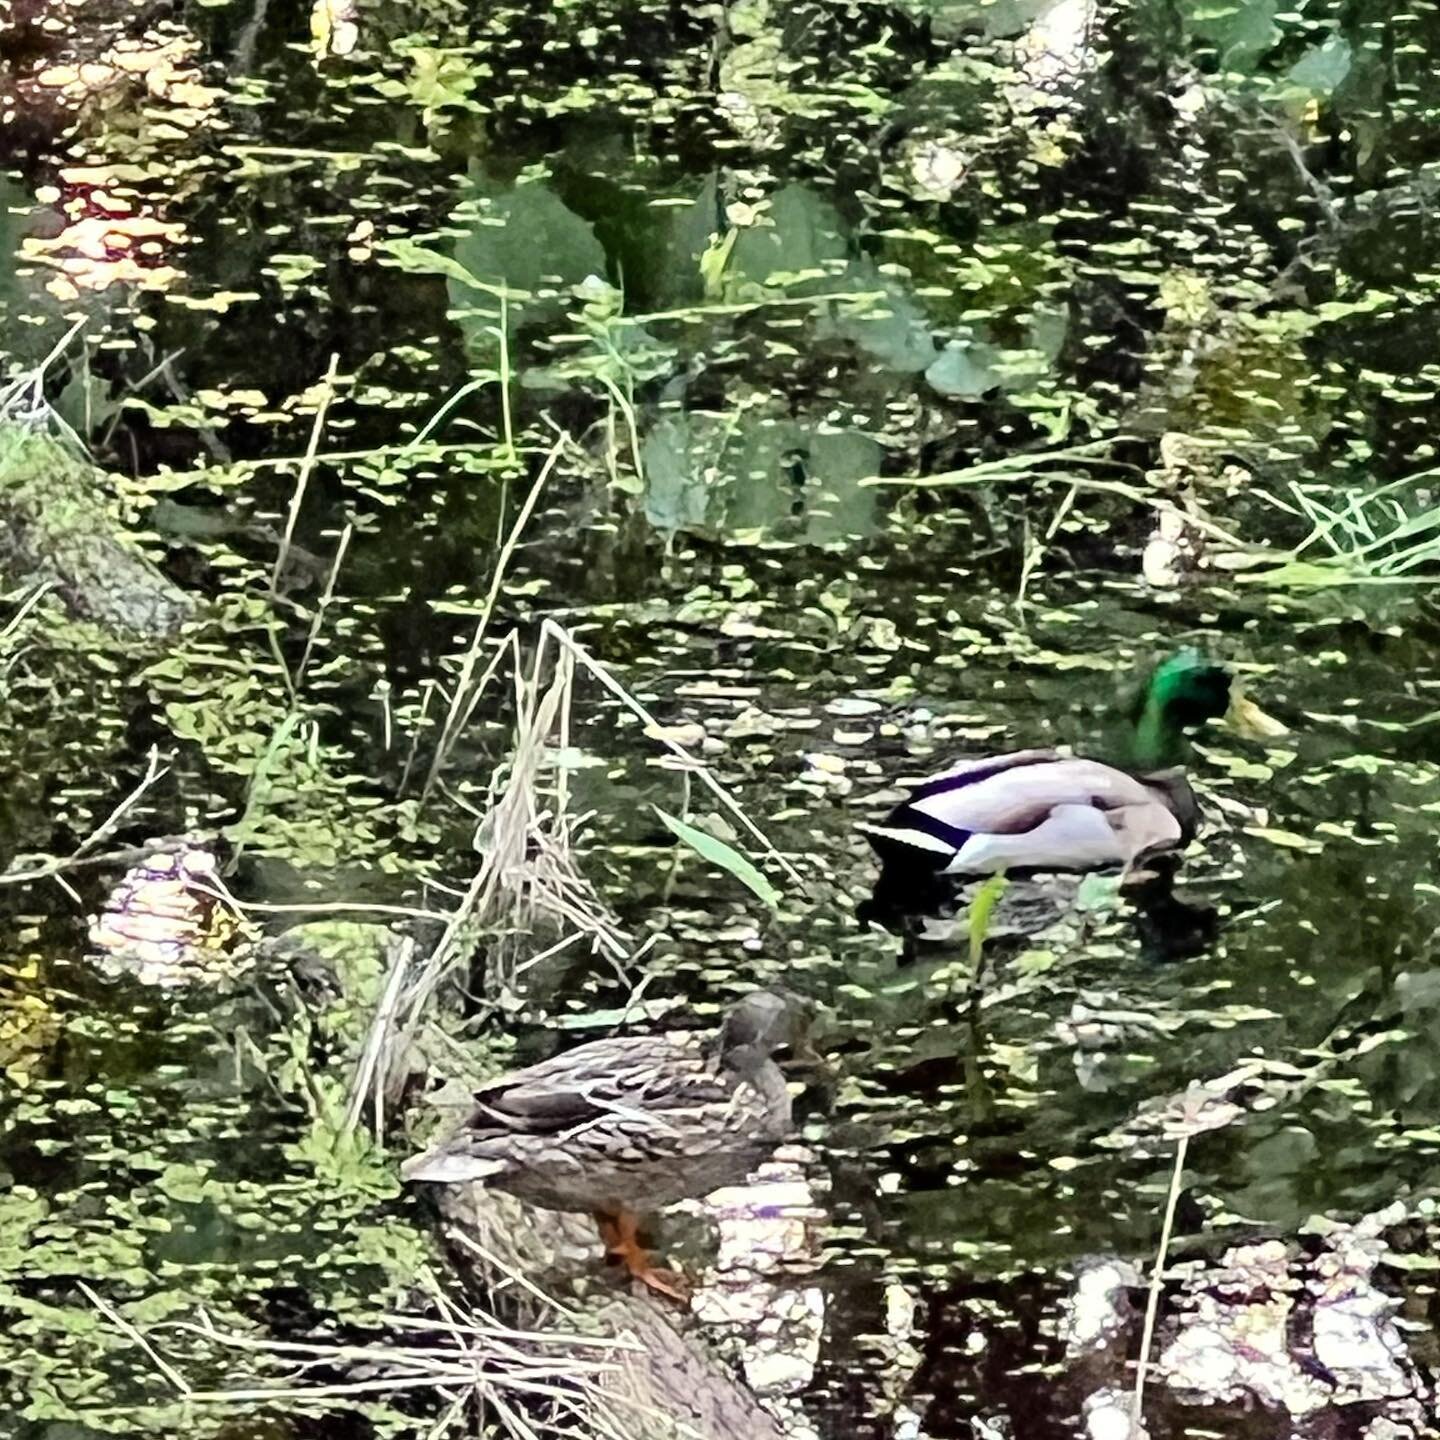 Can you spot the other duck? Two ducks have taken to the wetlands around our home. A female &amp; a male. Welcome to the team! 

#farm #ducks #freerange #regenerative #sustainable #homestead #nature #farmlife #garden #animals #friends